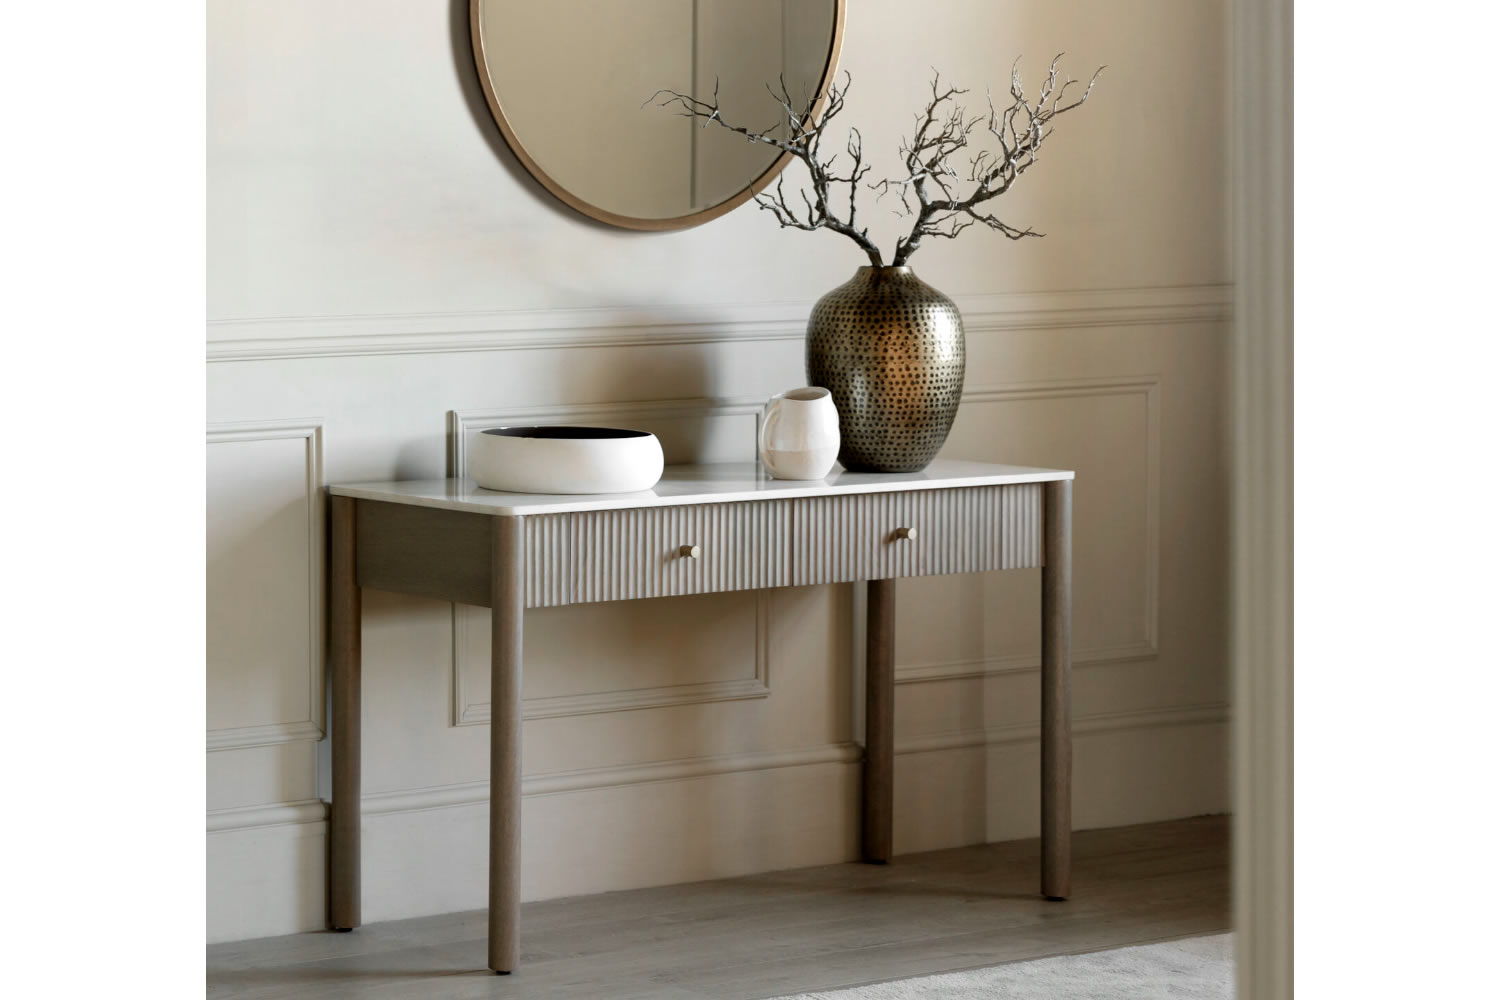 View Marmo 2 Drawer Hallway Console Table Crafted From Solid Mango Wood White Carrera Marble Top With GreyBlue Veins Elegant GoldTone Round Handles information